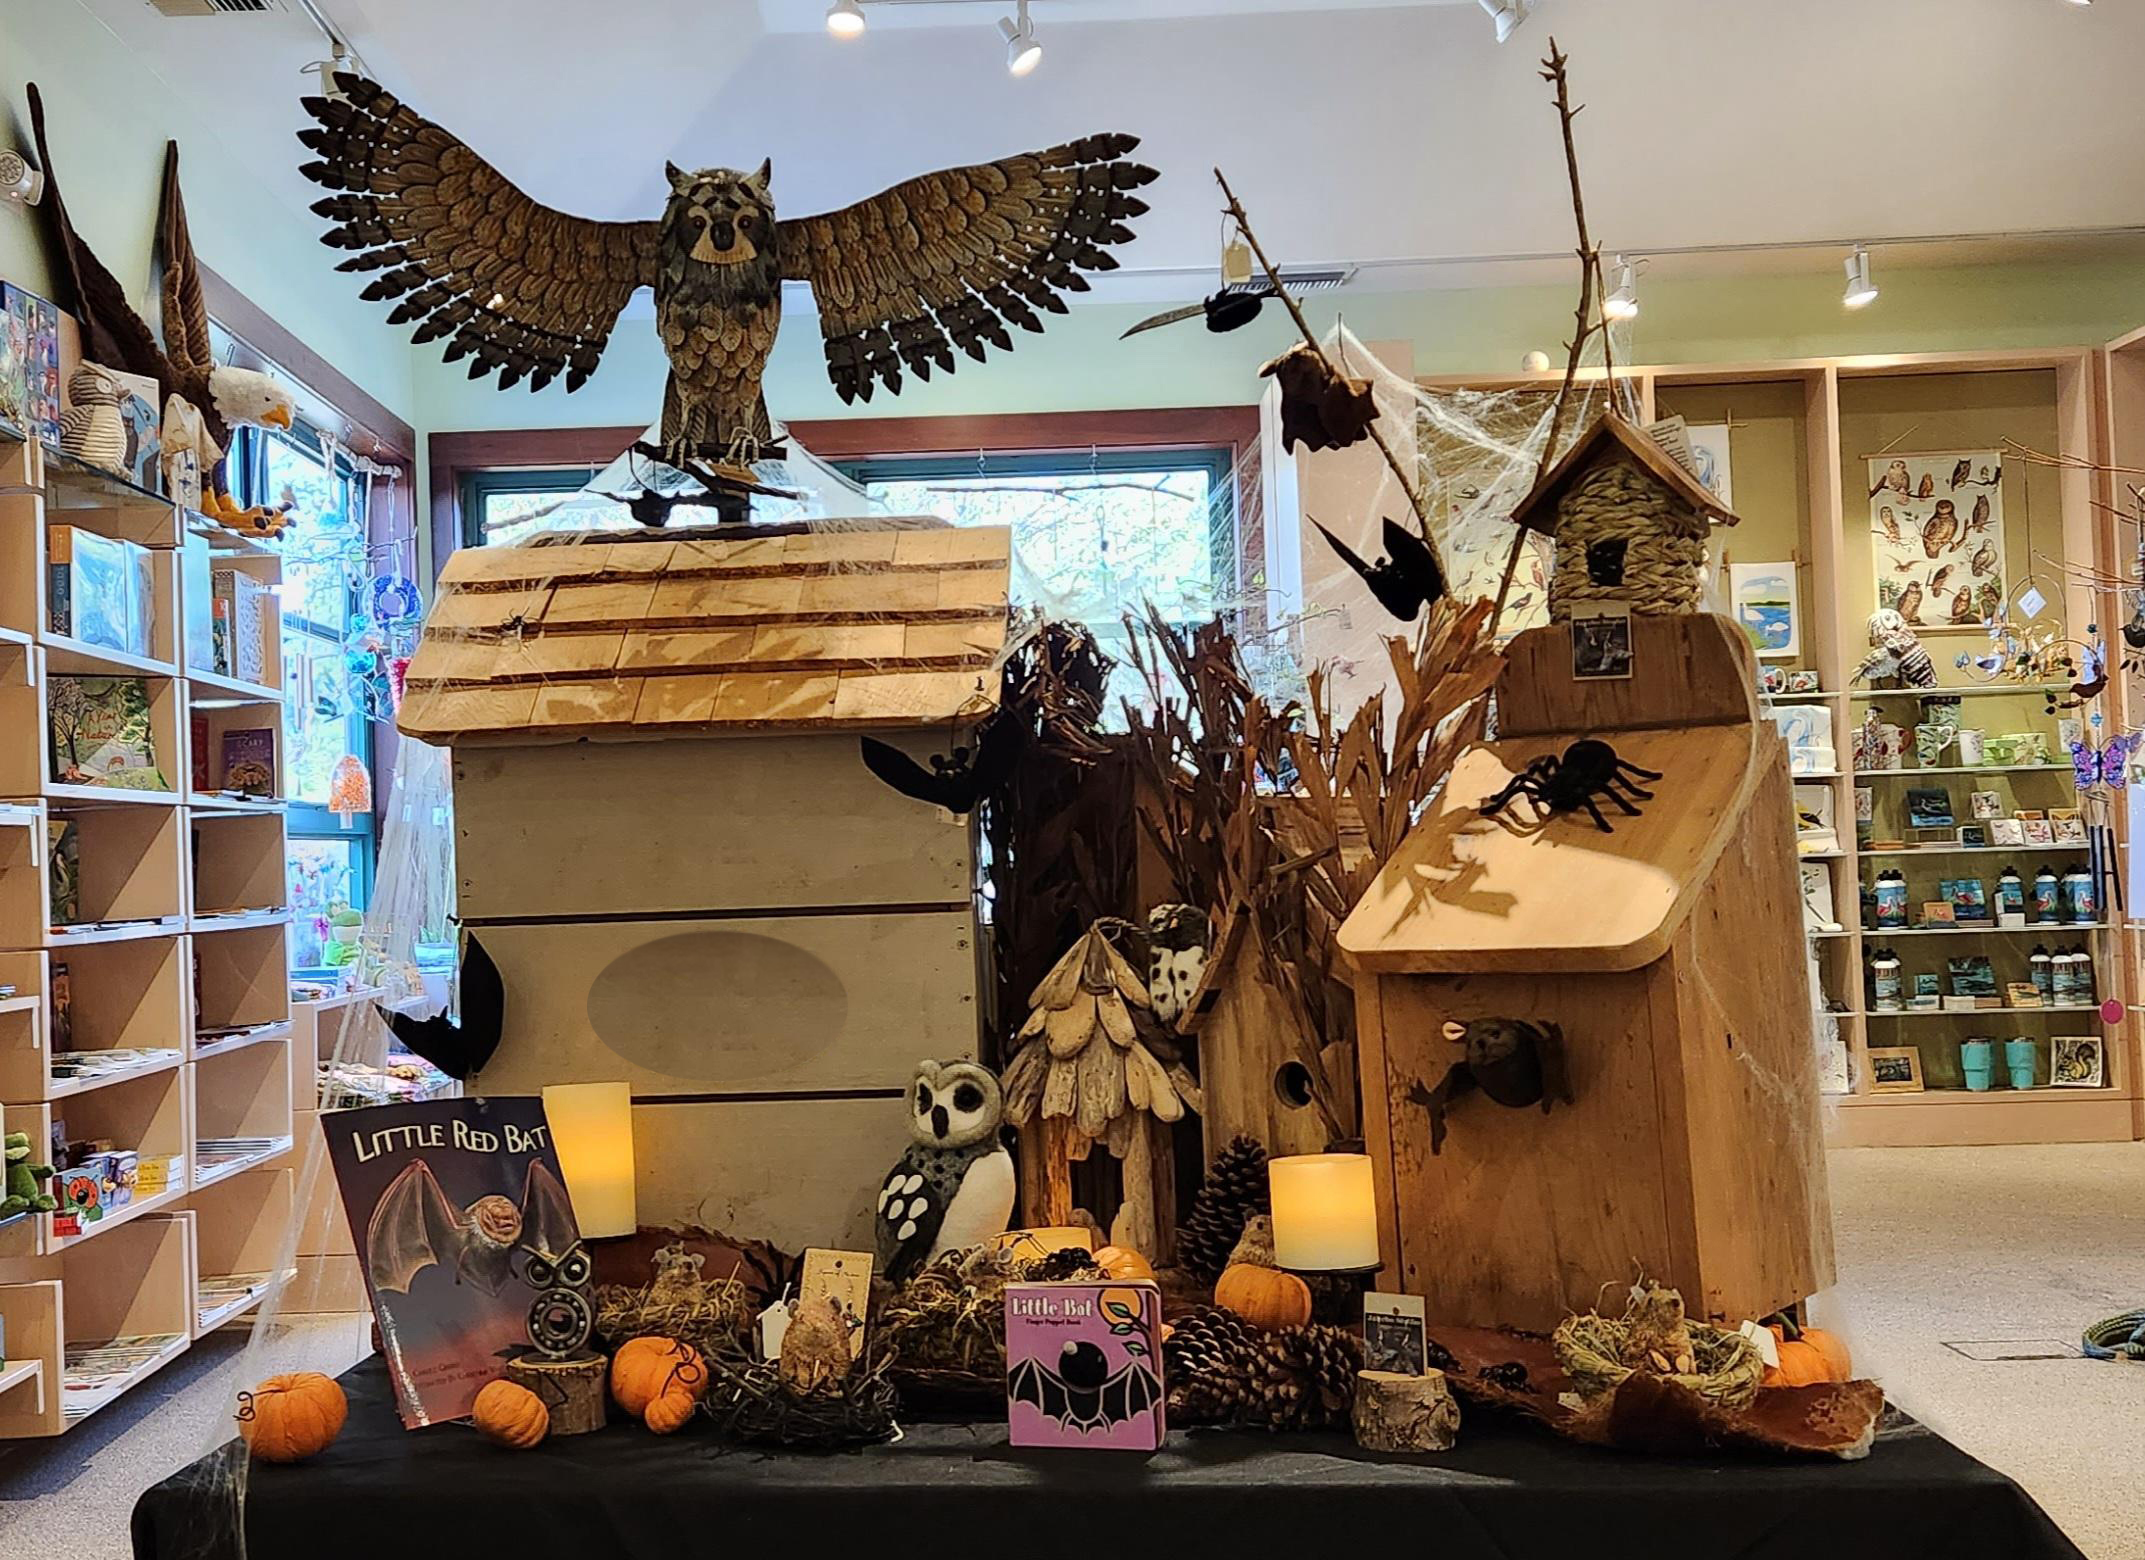 Photo of merchandise in the nature store including an owl, bat house, and decorations.